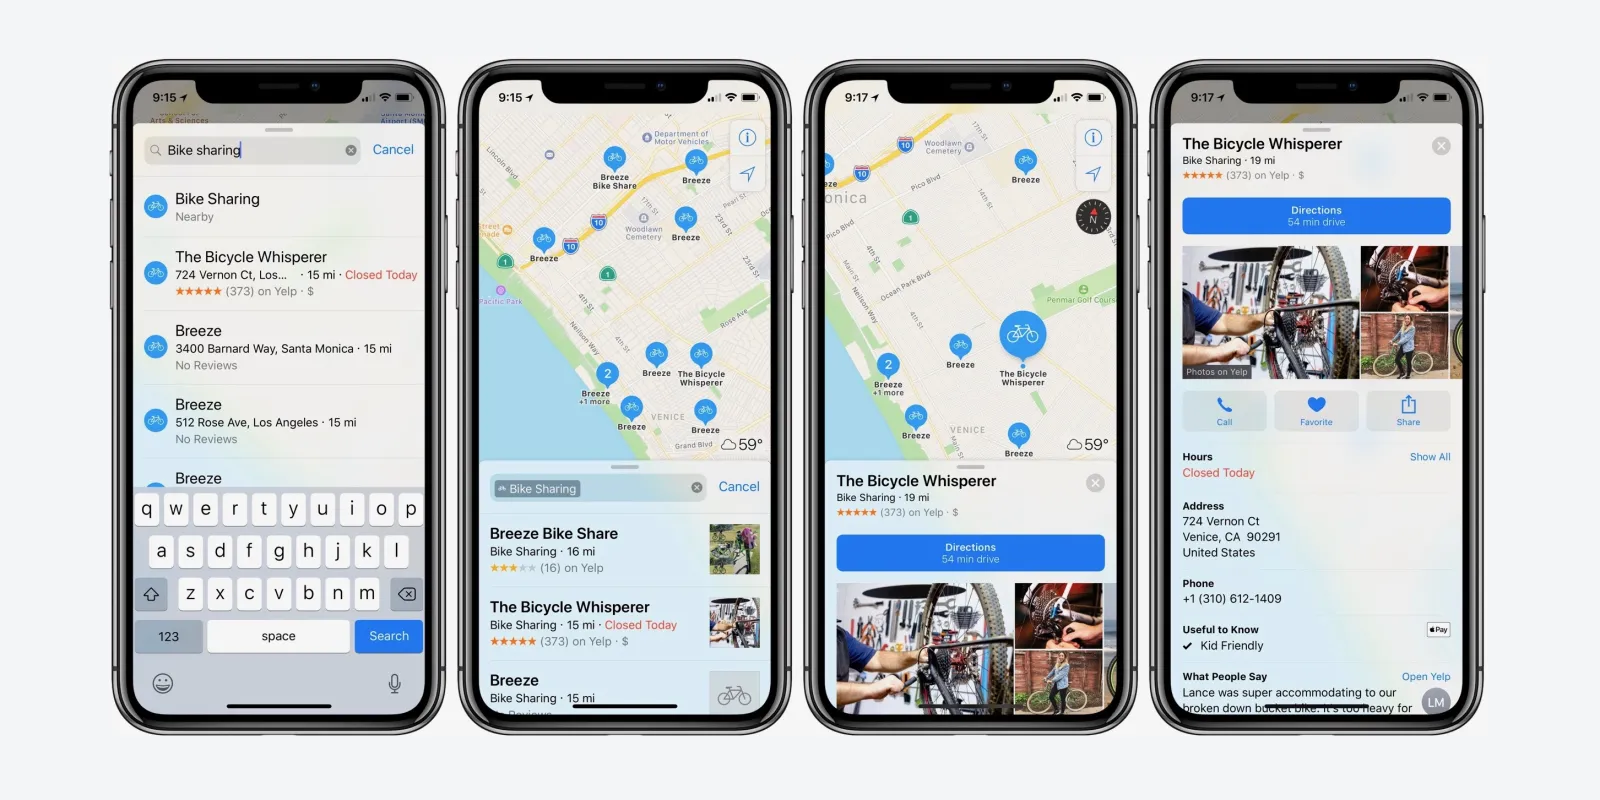 How to Enable Location Services on iPhone